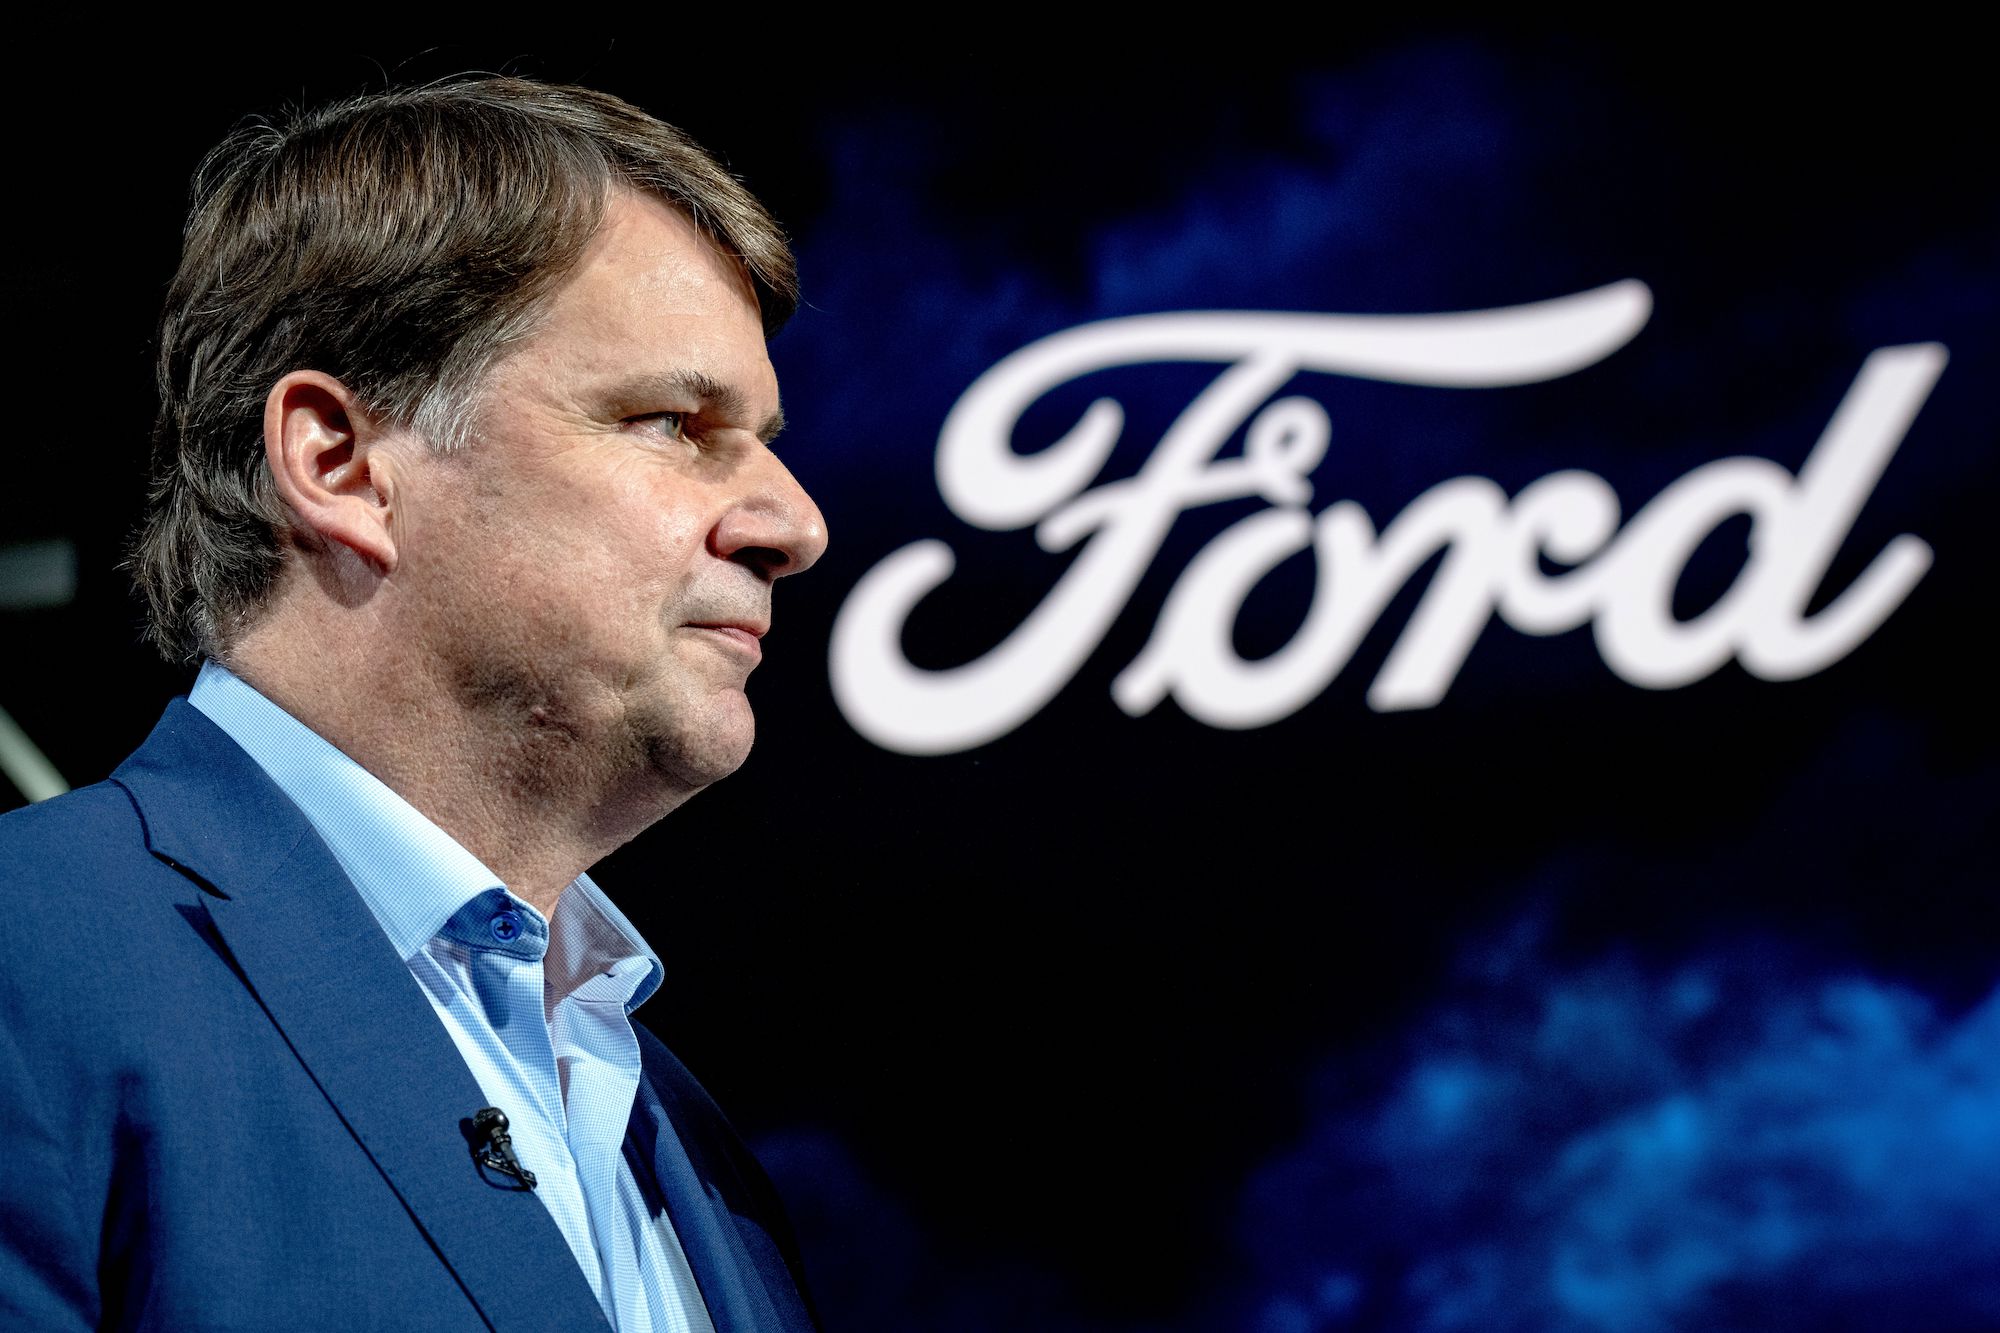 Shifting Focus to Electric Vehicles, Ford Announces Management Changes